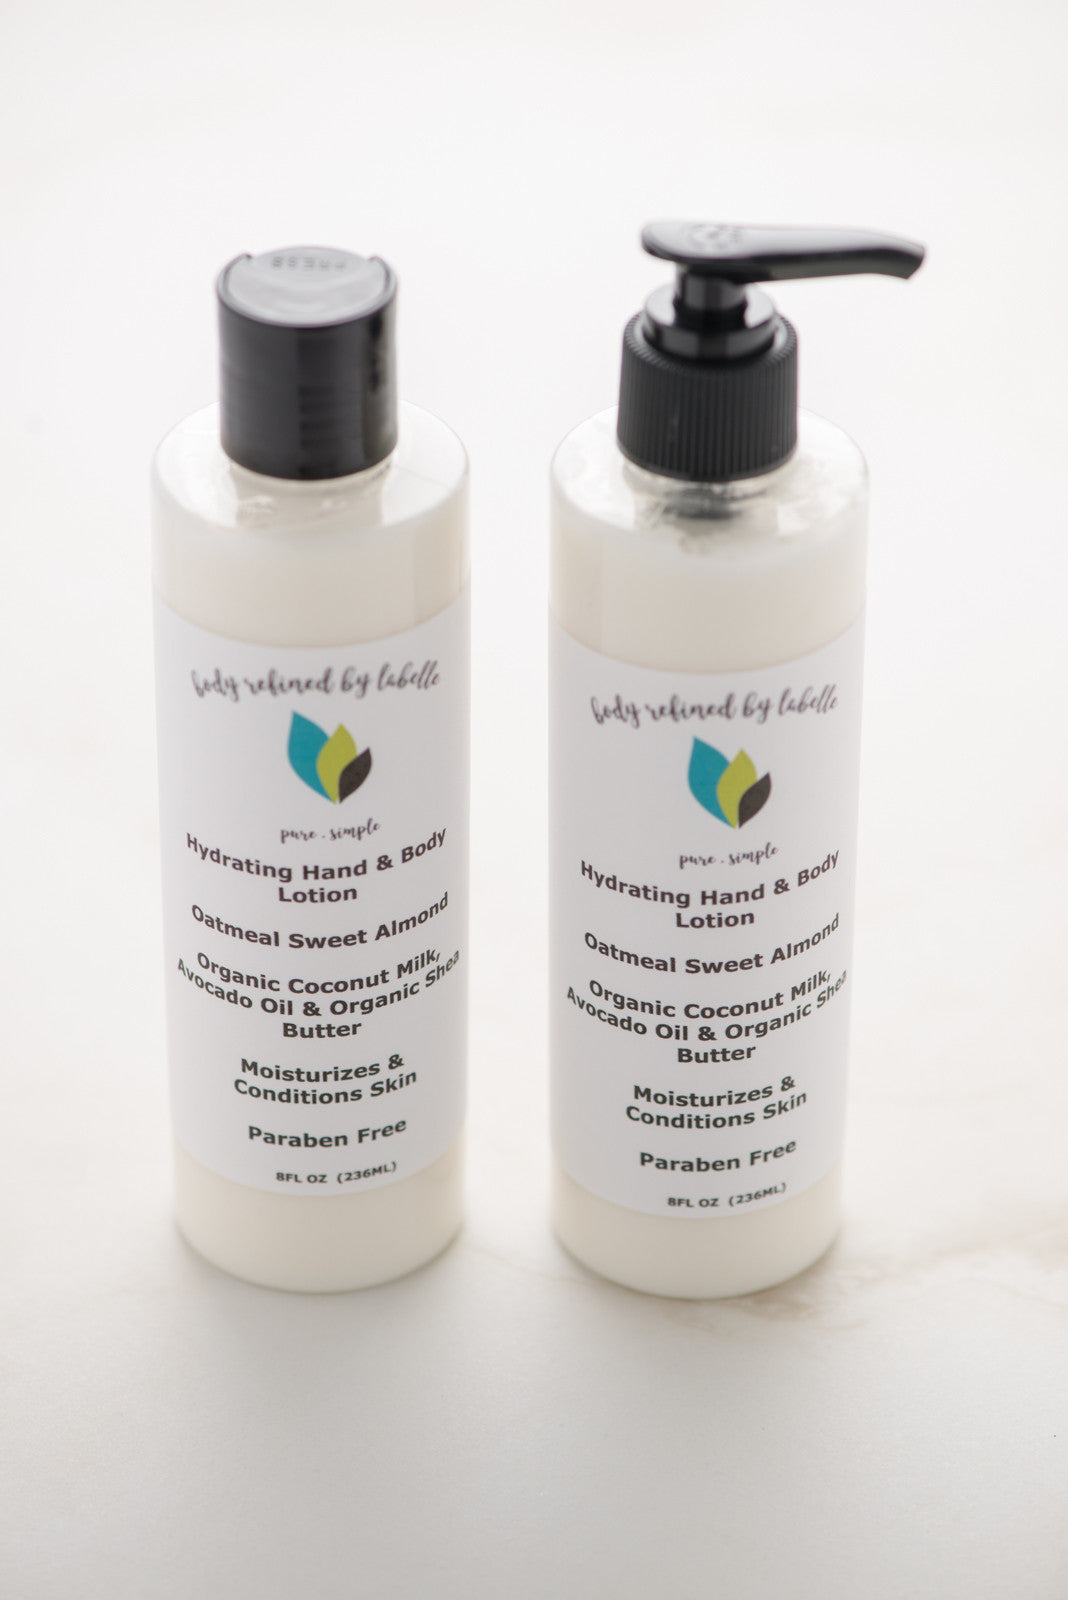 Oatmeal Sweet Almond Hand & Body Lotion | Vegan | with Coconut Milk